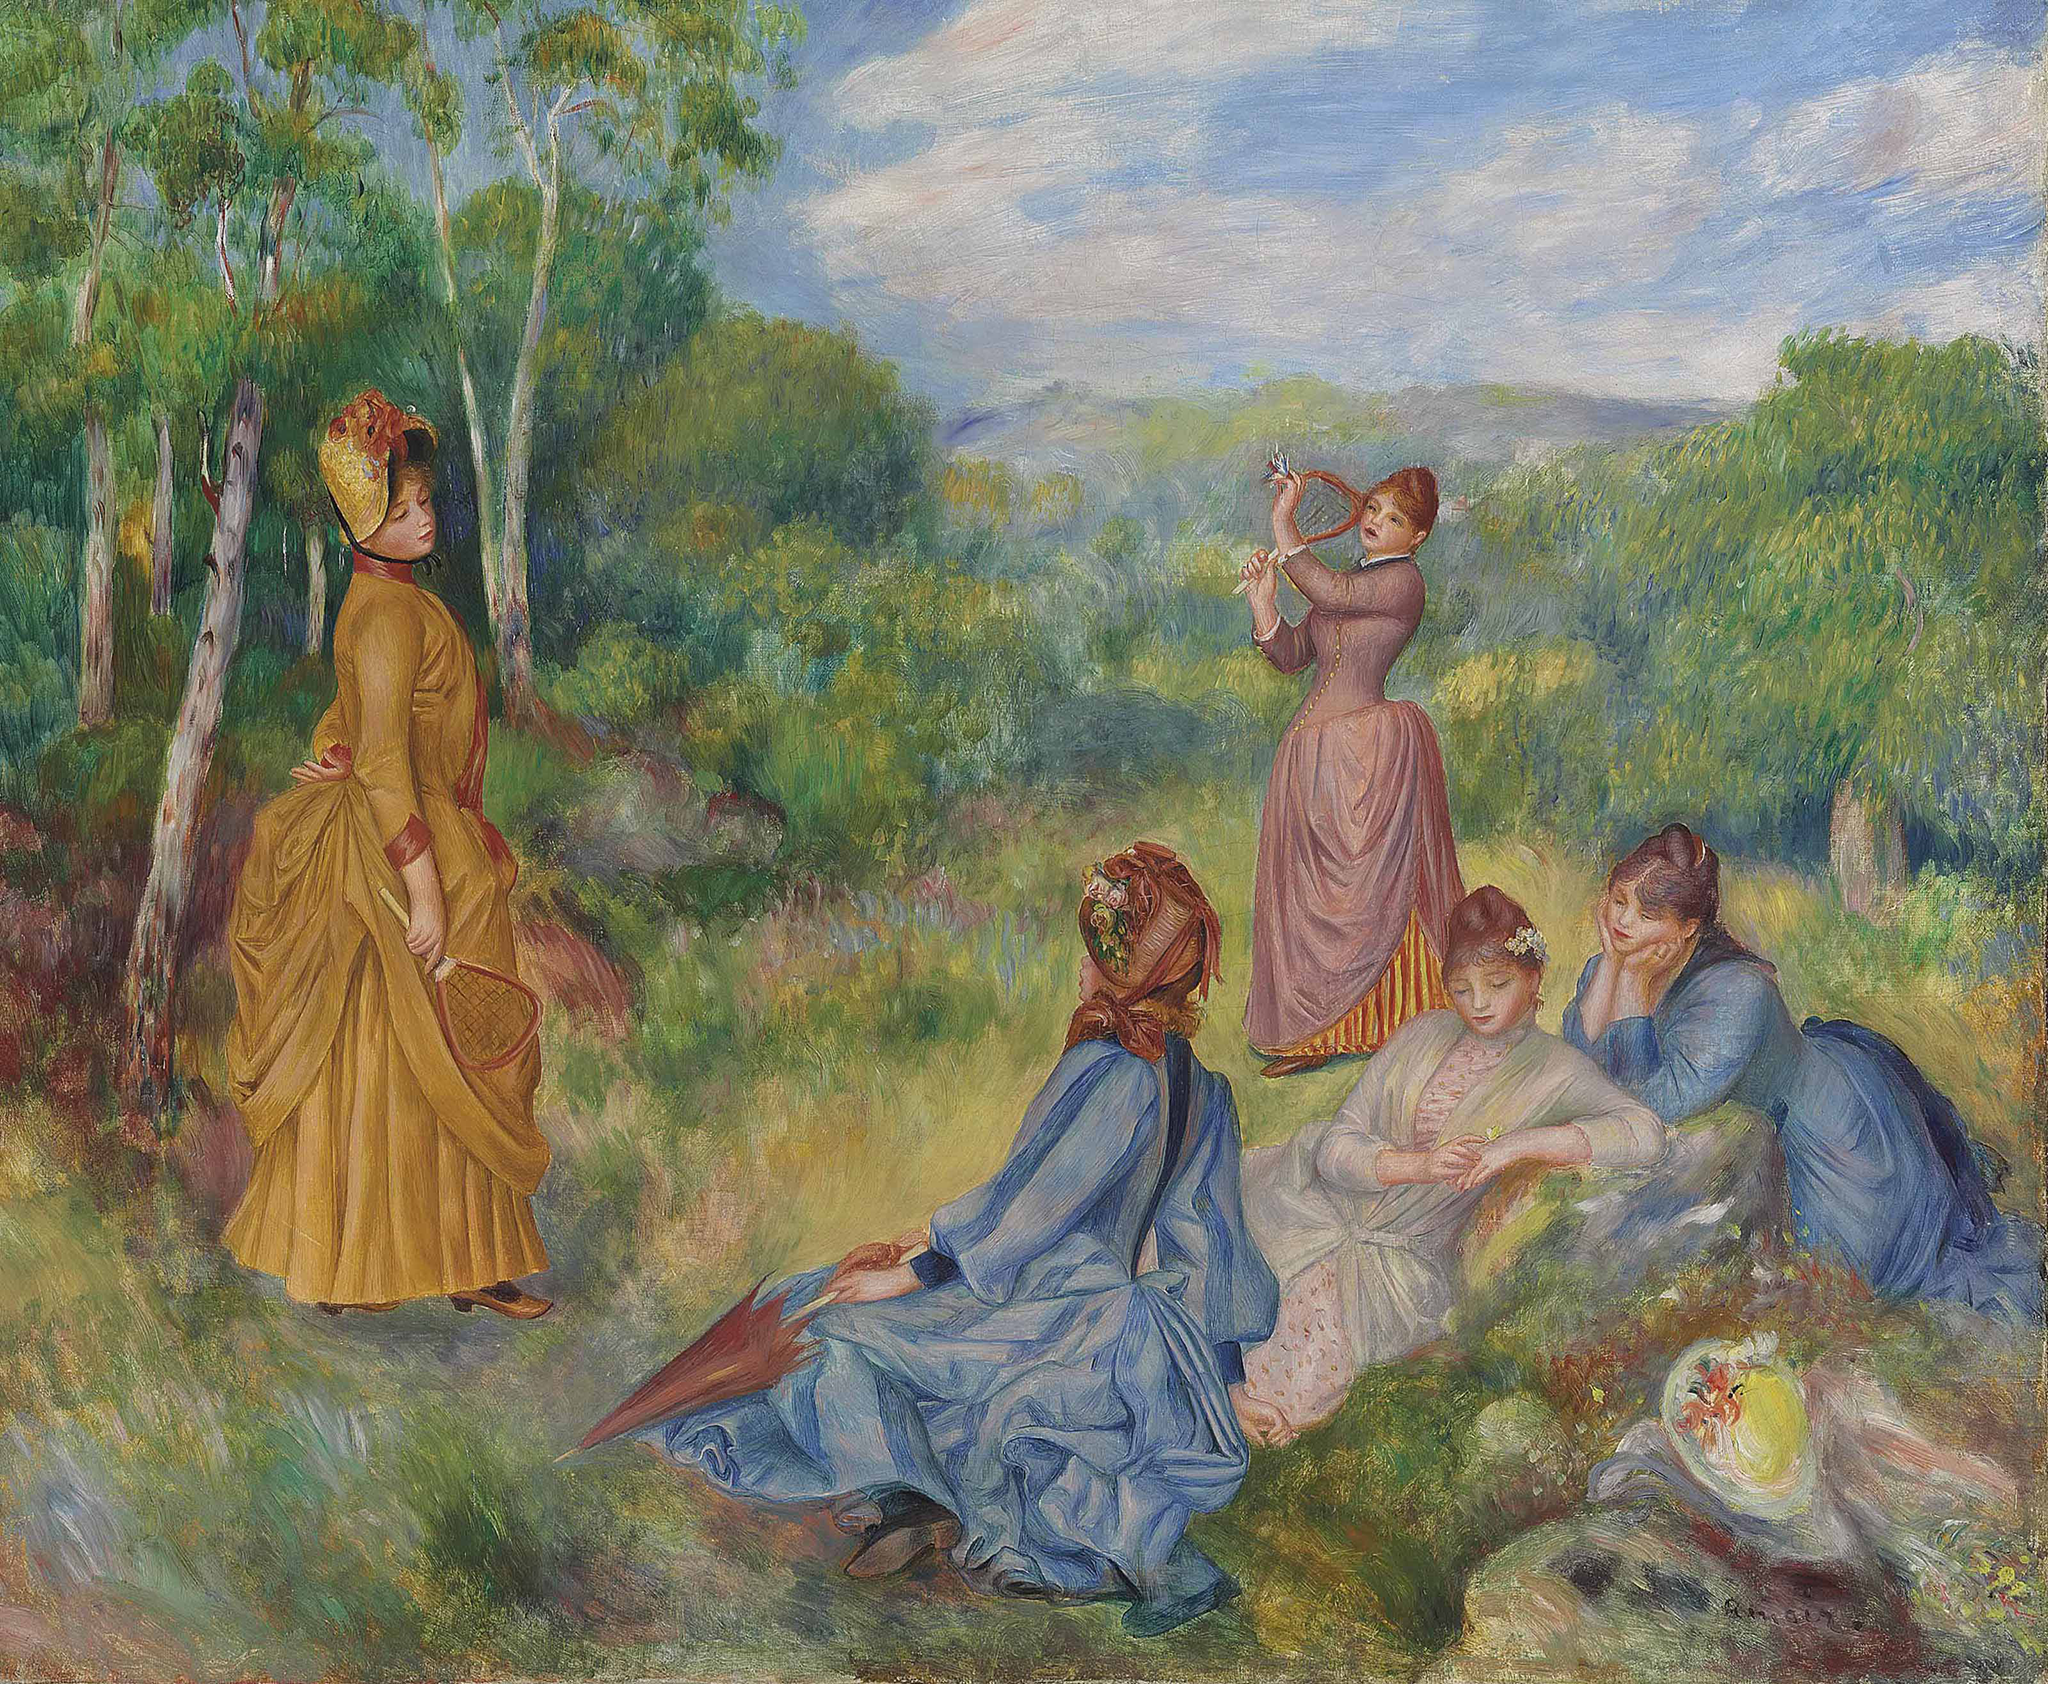 A painting depicting five women with colorful long dresses in a grass field within a forest. Two of the women laying against a large rock in the grass wear light blue, while the one in the middle wears a light gray. A woman with a pink dress stands in the field and plays with her pigtails. A woman wearing a yellow dress stands under the shade to the left.